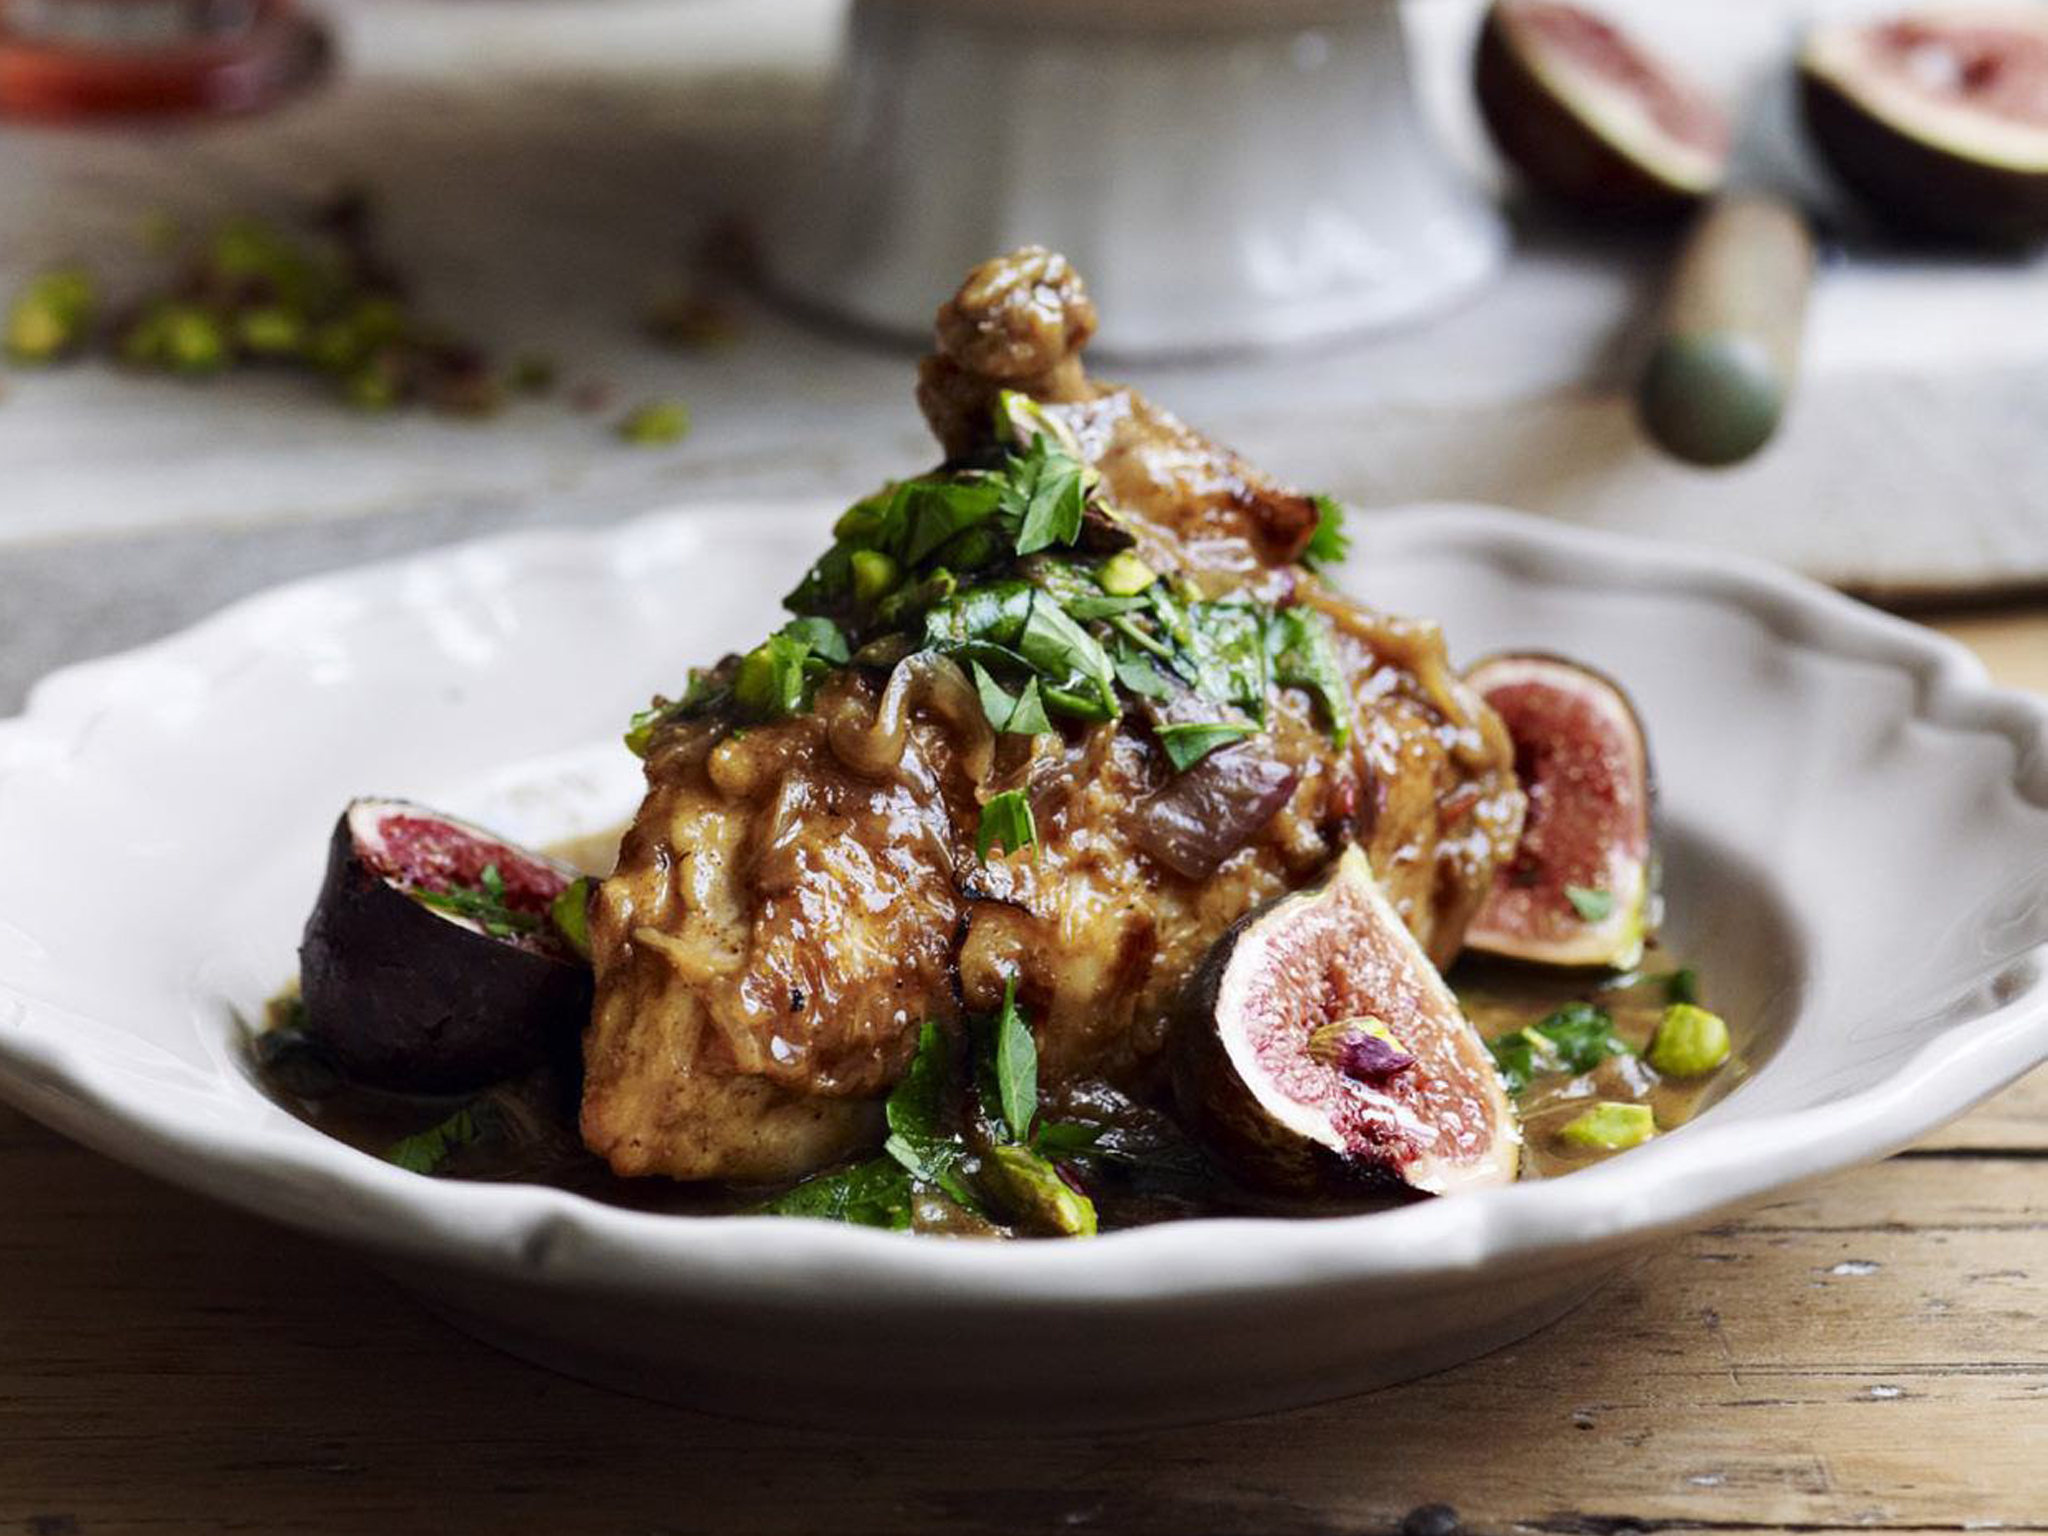 CHICKEN AND FIG TAGINE